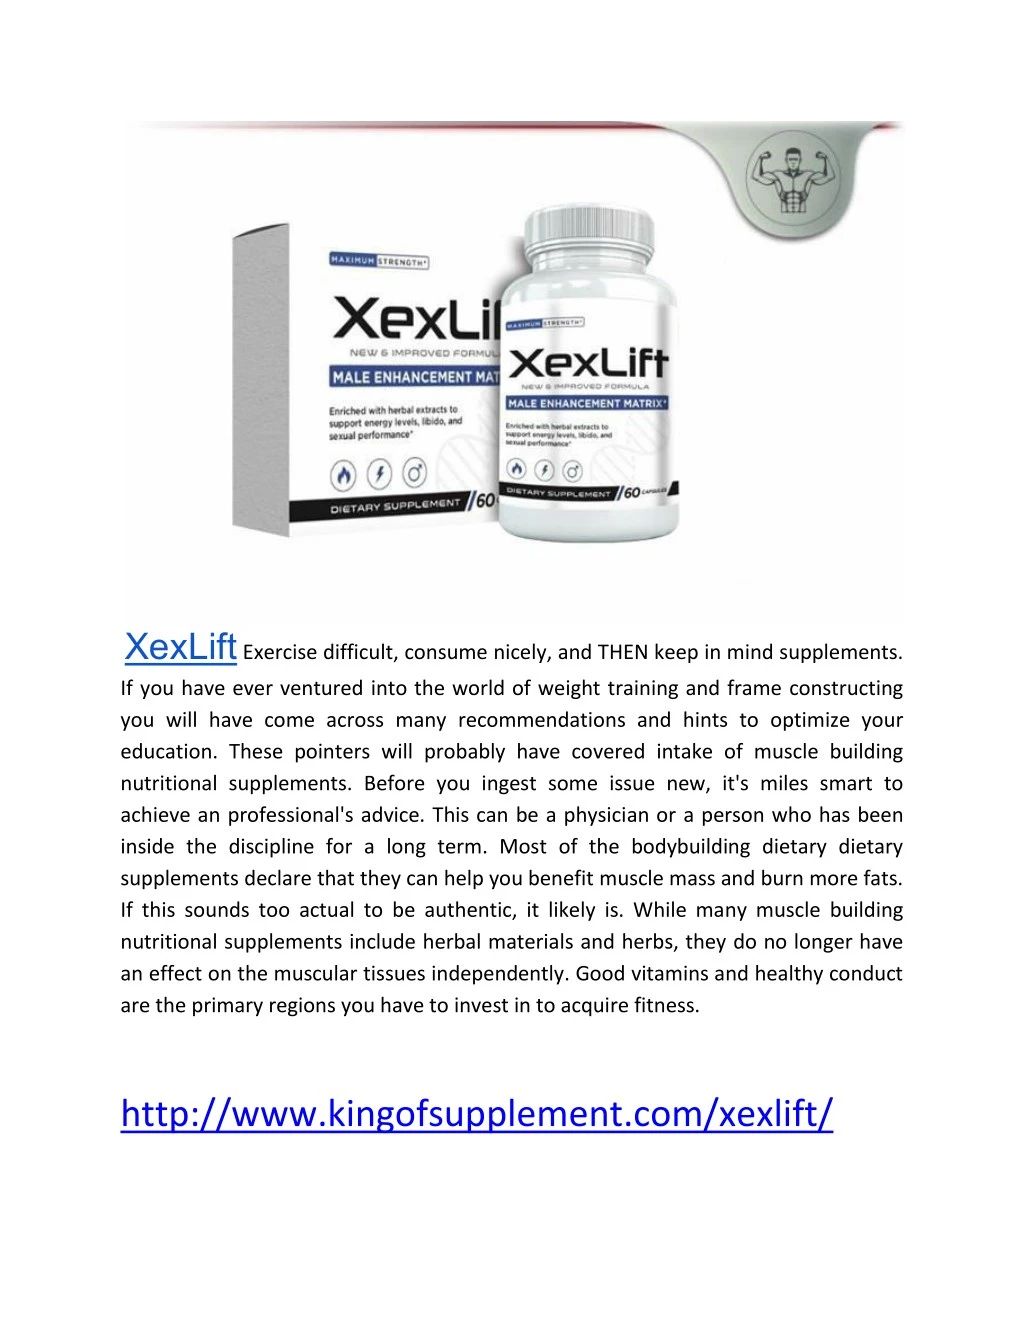 xexlift exercise difficult consume nicely